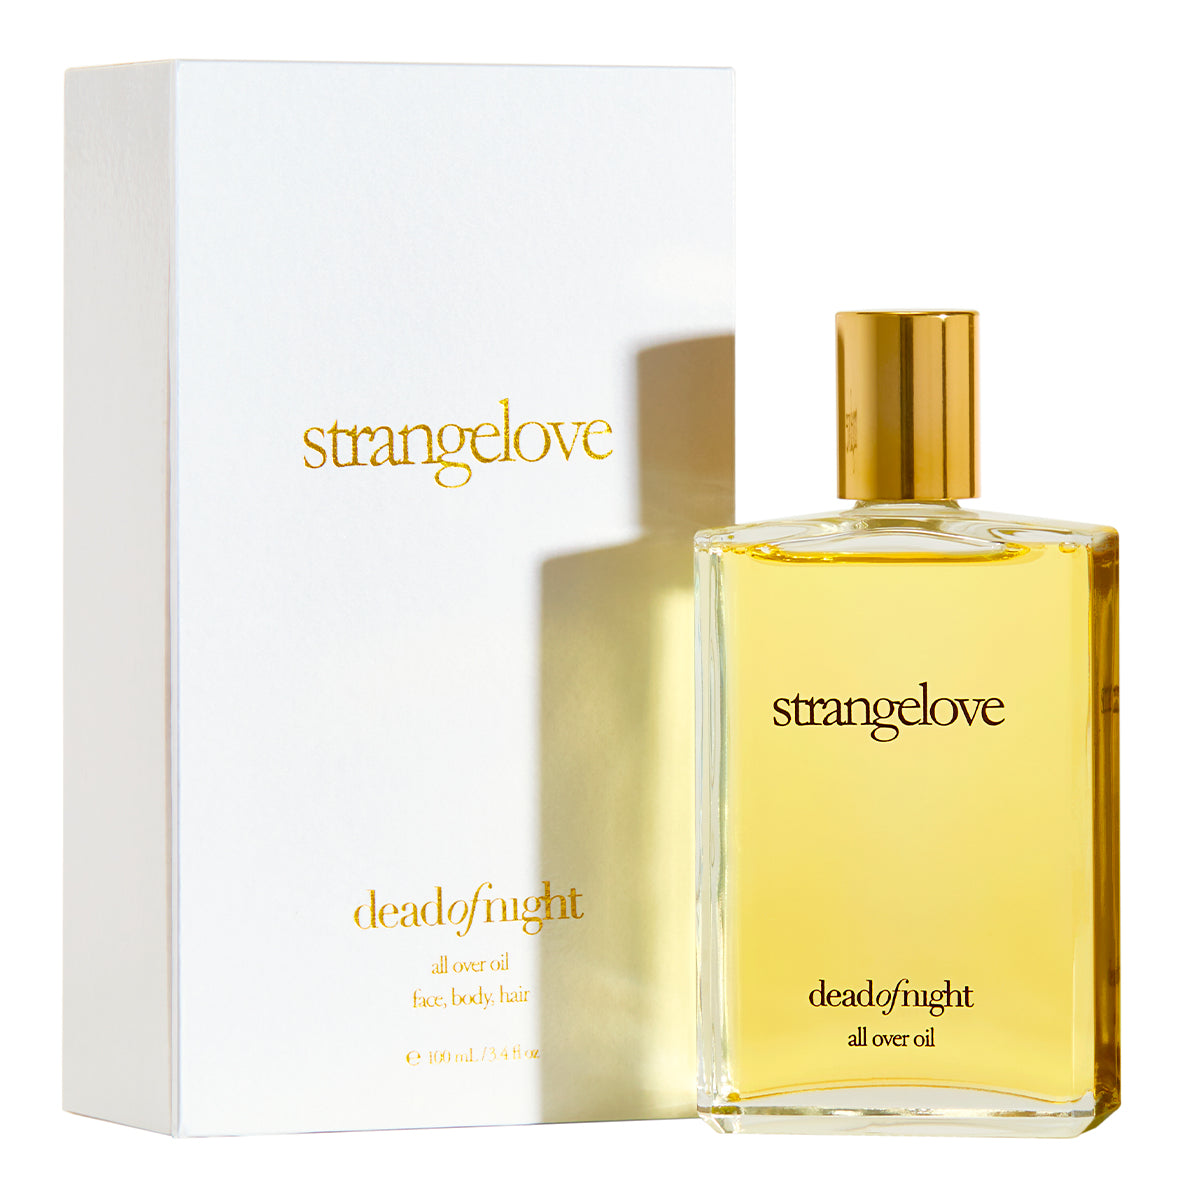 Dead of Night (All Over Oil) - Strangelove NYC - Aceite corporal 100ml